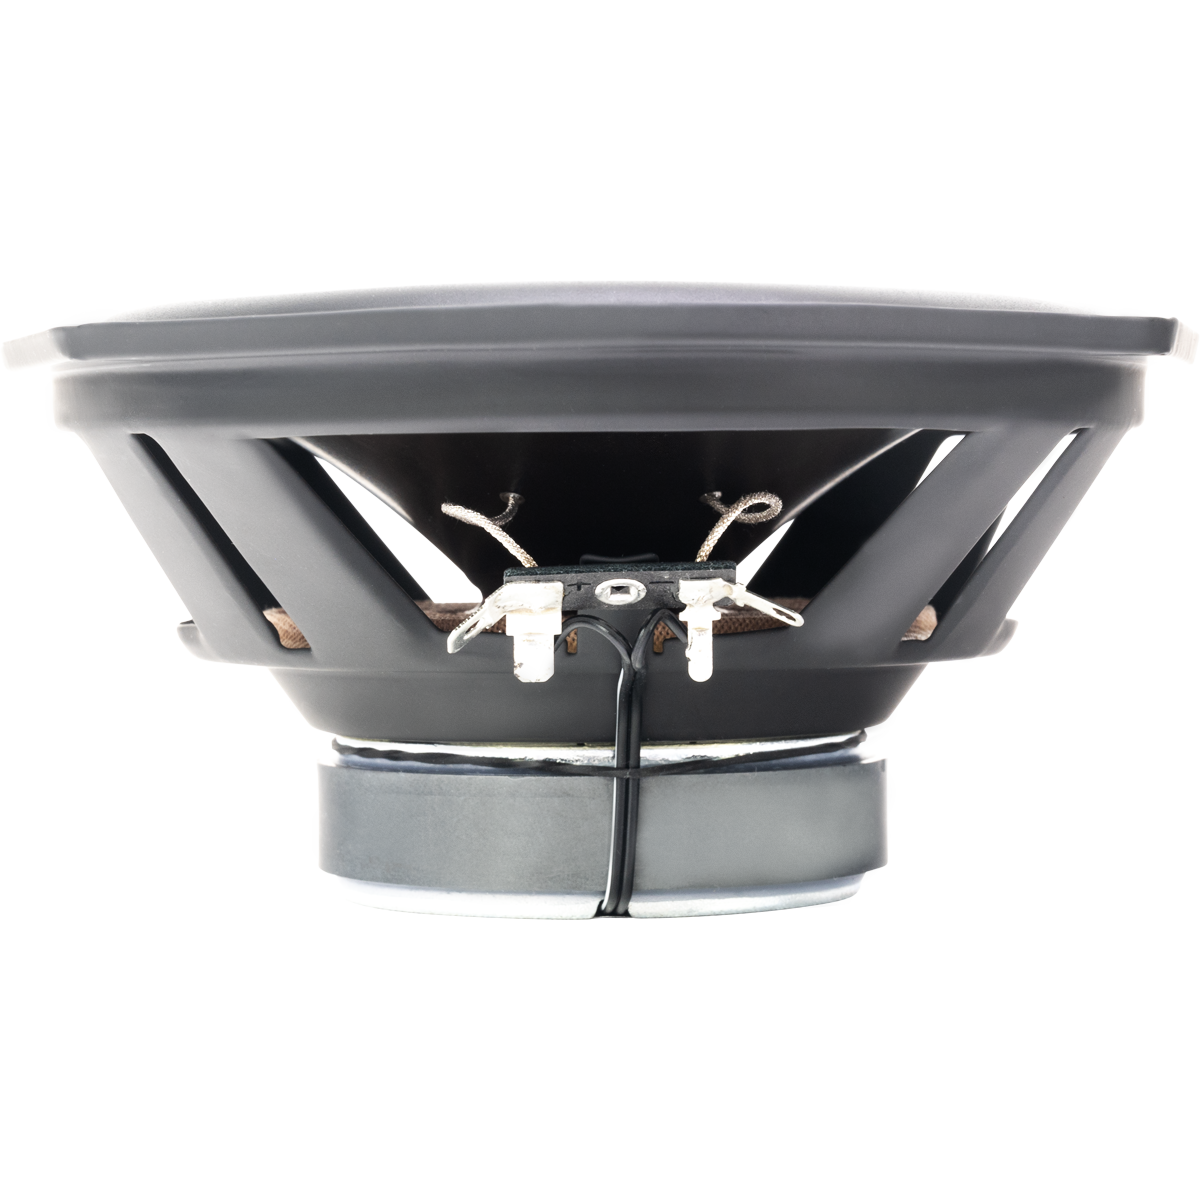 Single Stinger Audio 6x9" 50 Watt (RMS) Coaxial Car Speaker (wearing a grill) facing upwards on a white background